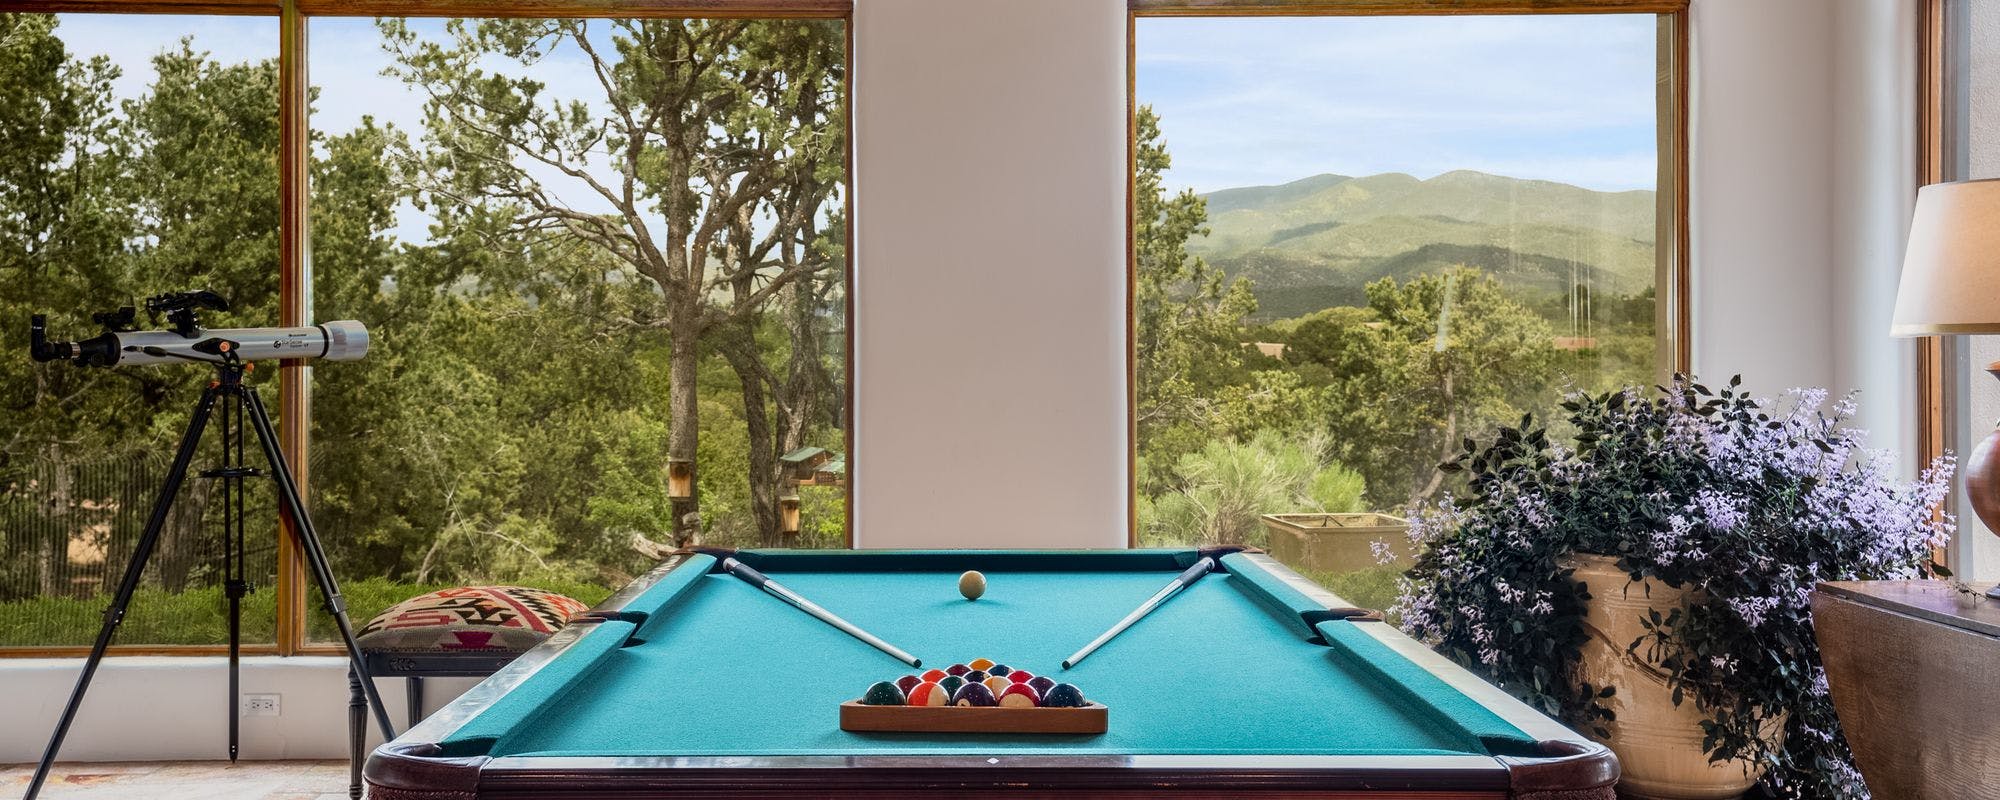 A game room with a view in a Santa Fe vacation rental